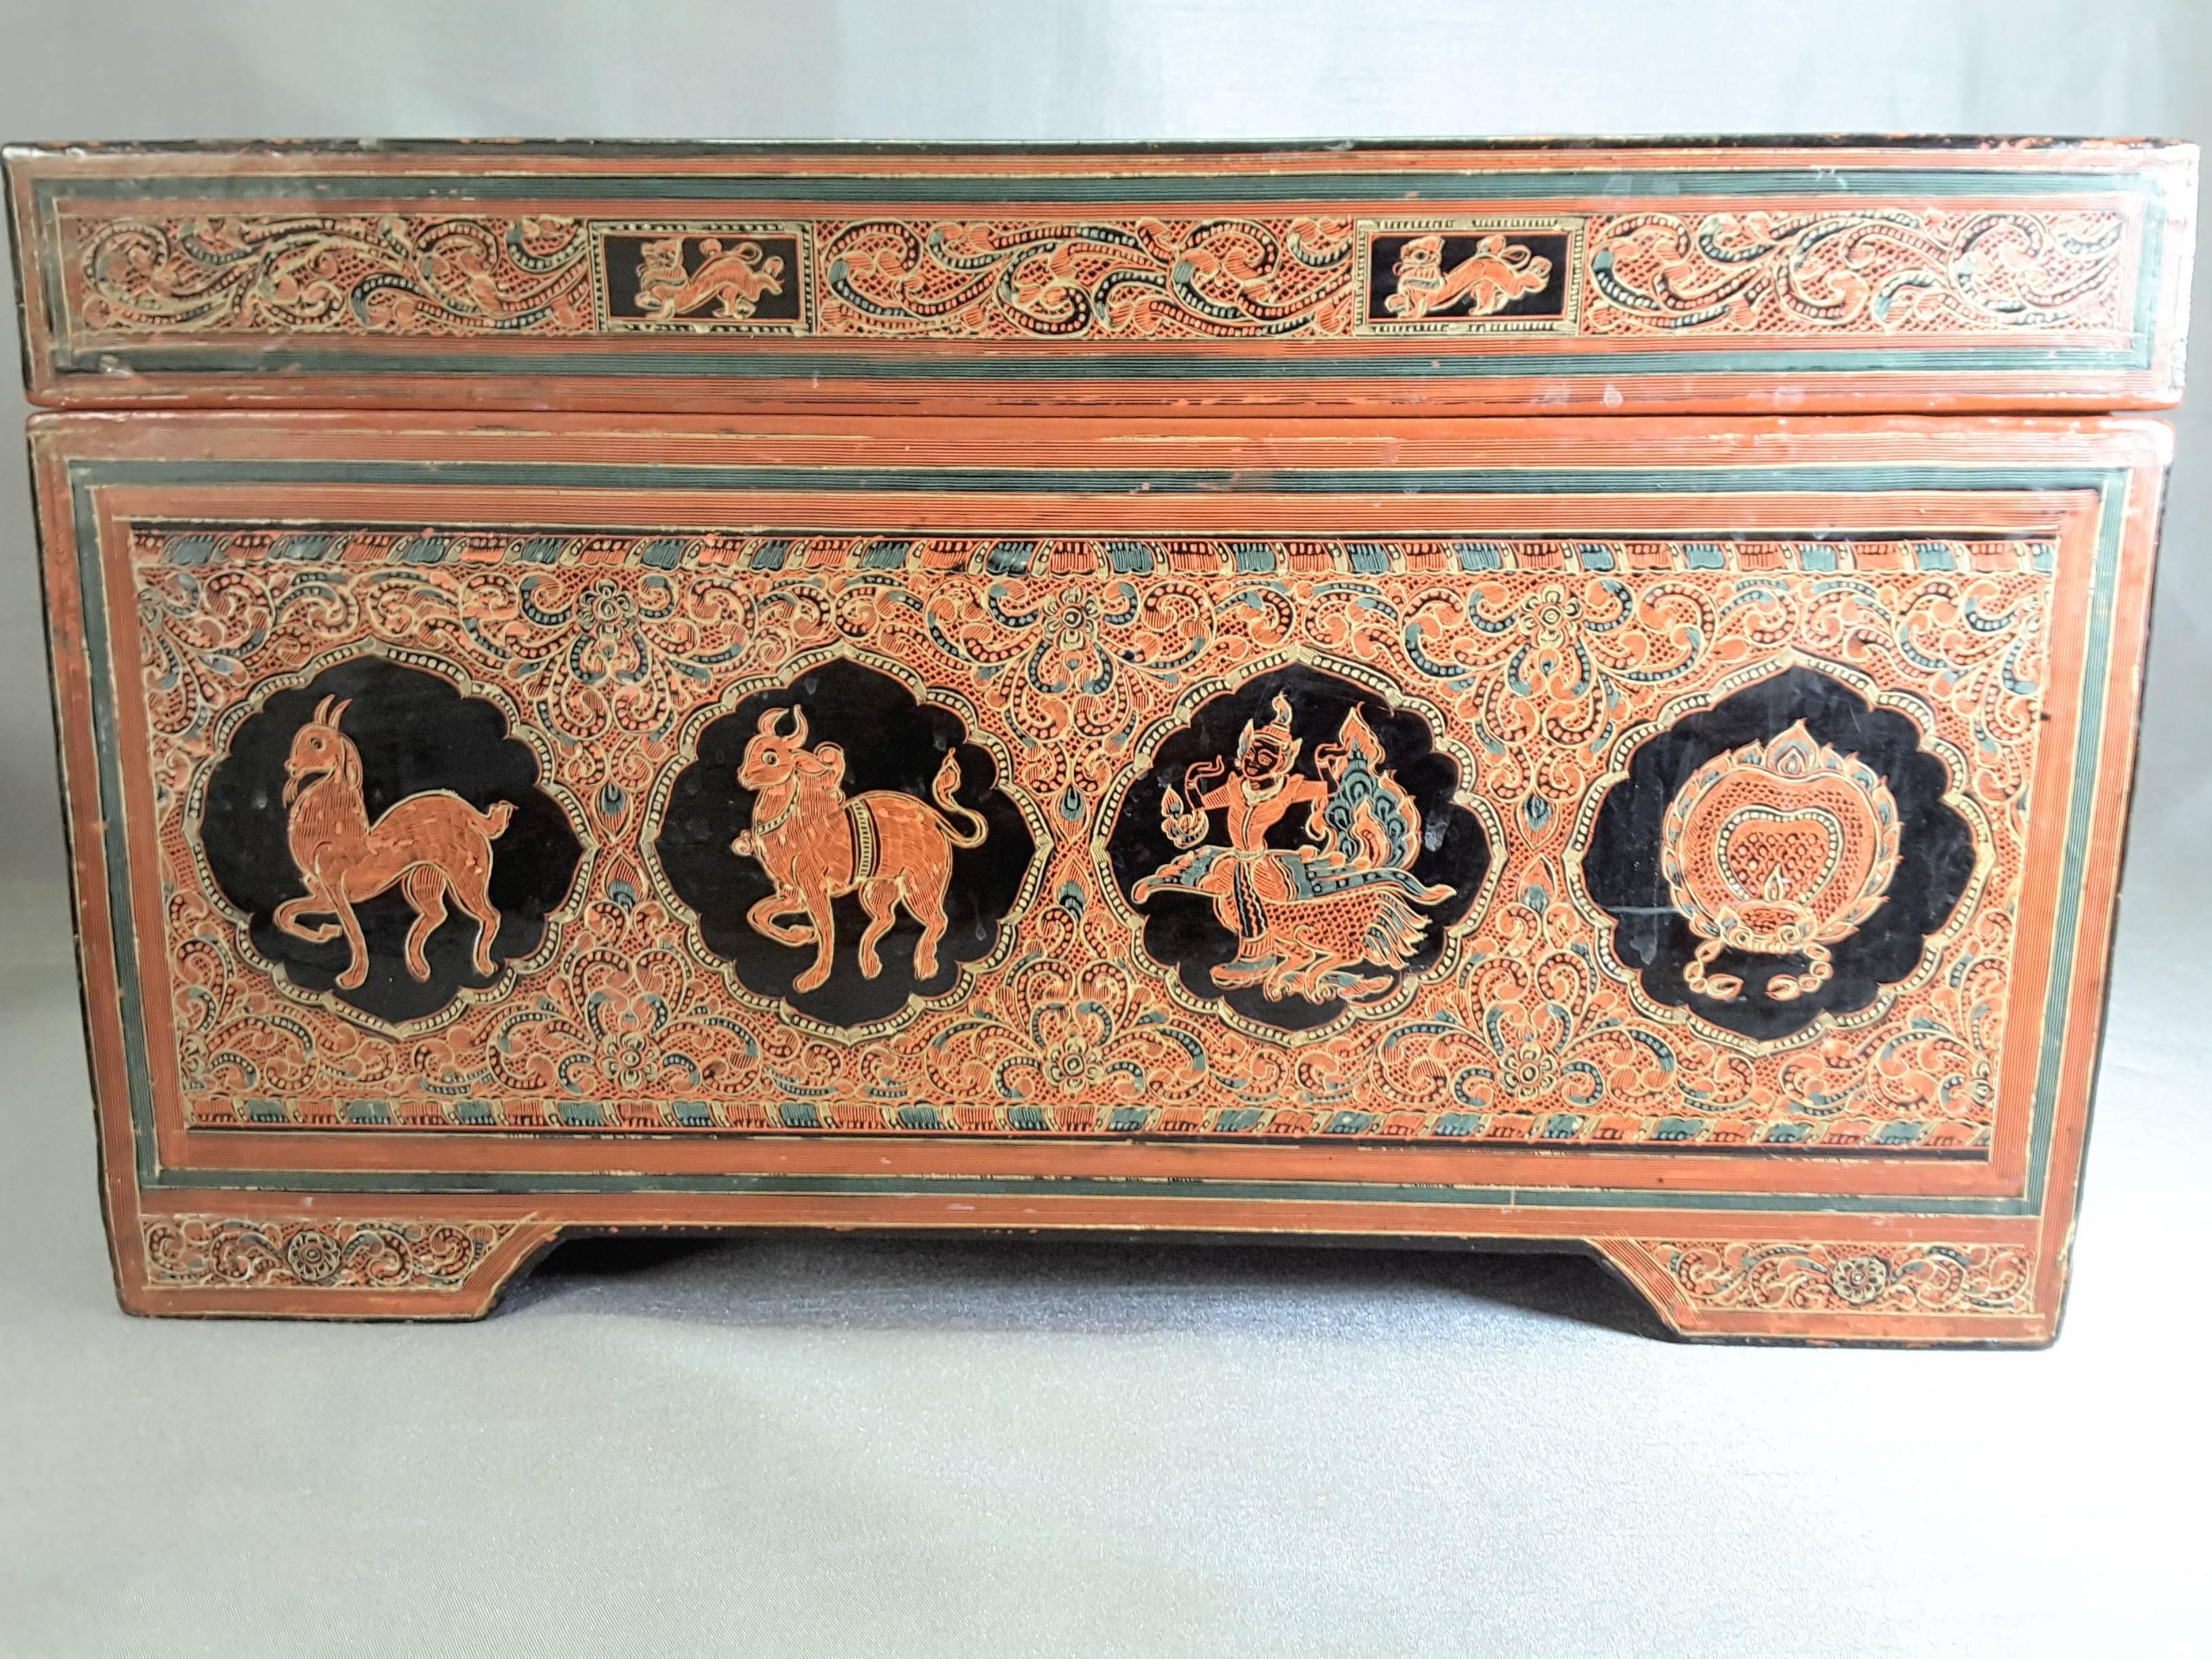 South East Asian document/storage box, Thailand or Burma, circa 1940s, decorated with figures and animals, done in an embossed style in black and browns, on a raised base. The lid is hinged and the interior in a single color. The document/storage